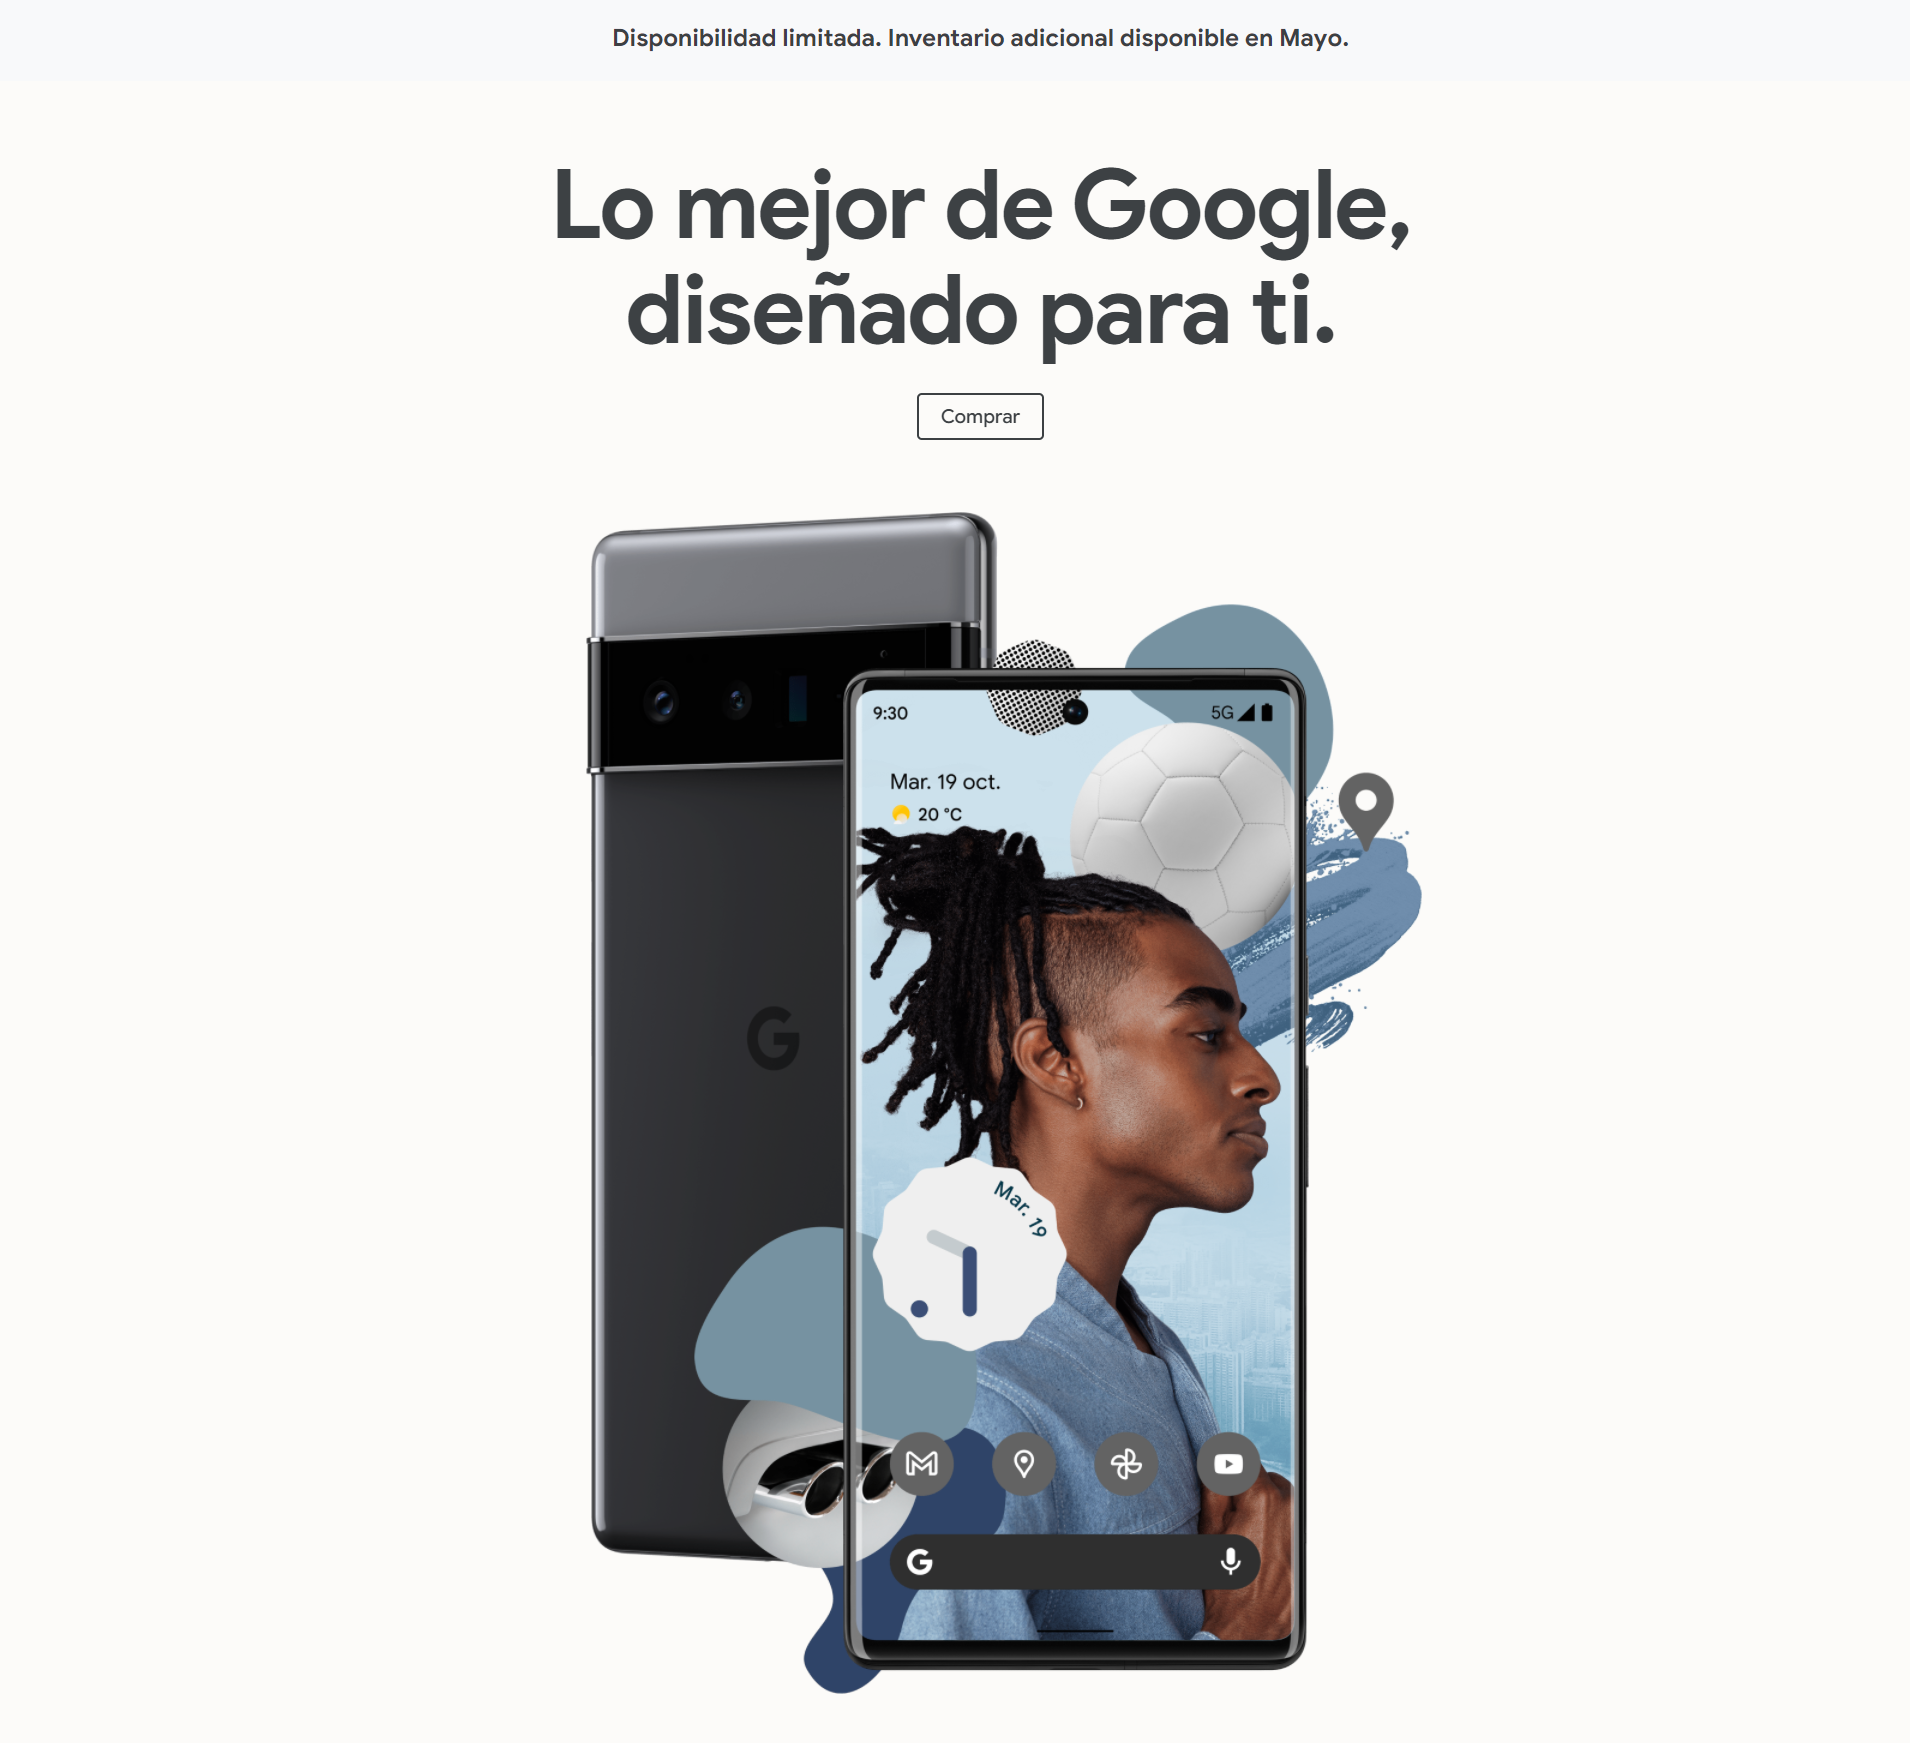 Google Store listing for Pixel 6 Pro in Spain